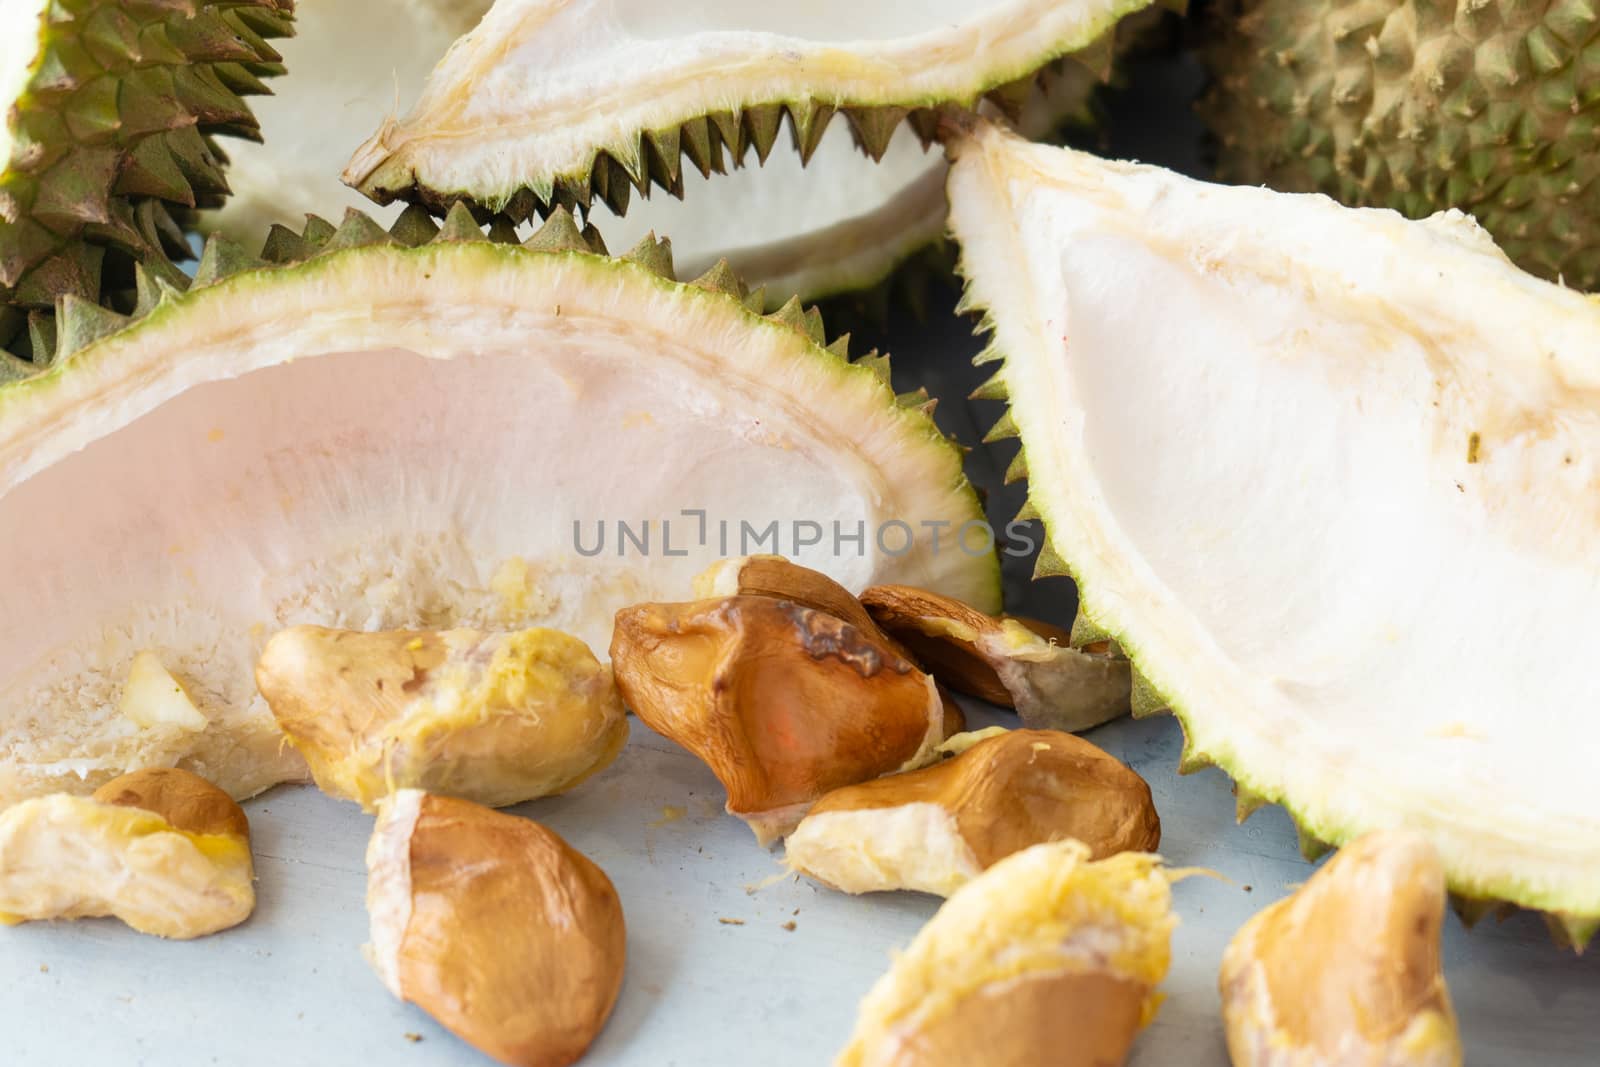 Leftover durian, shells and seeds on table.